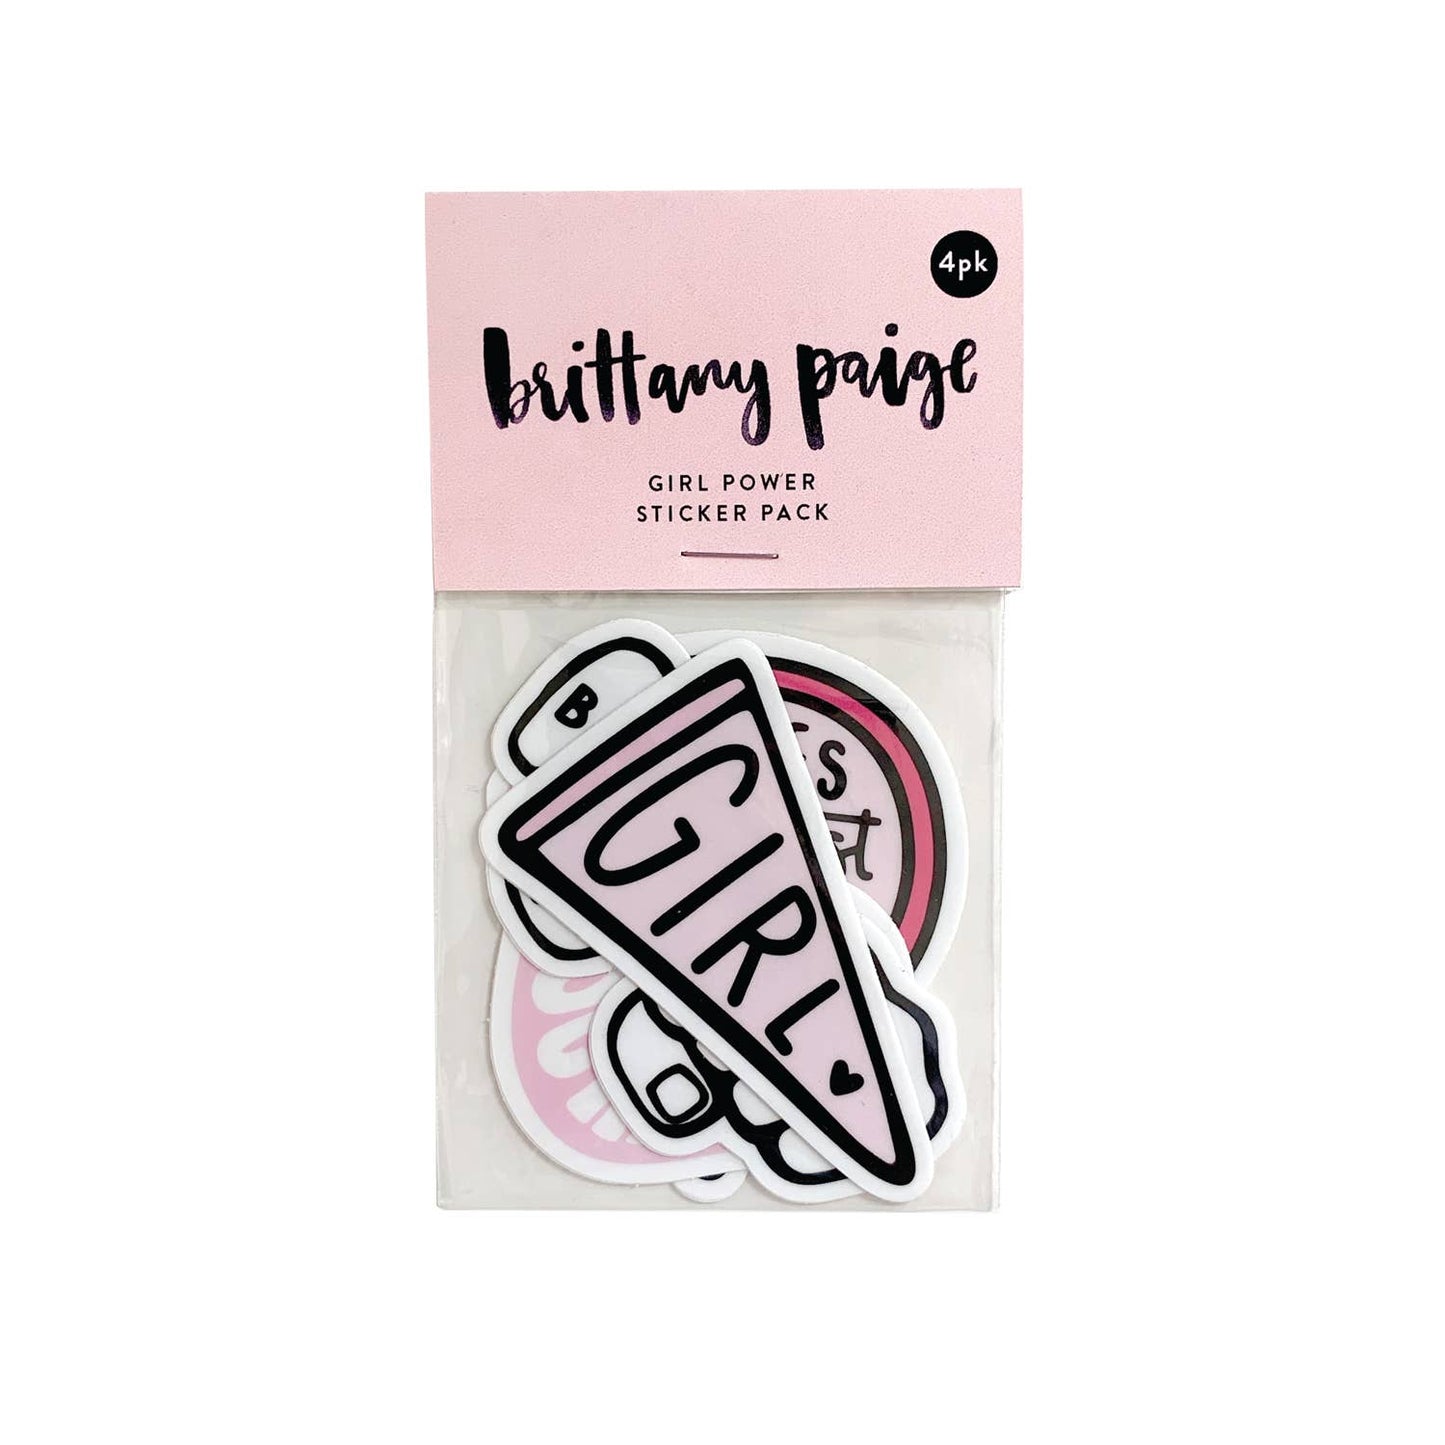 Girl Power Sticker Pack Home Goods Brittany Paige   